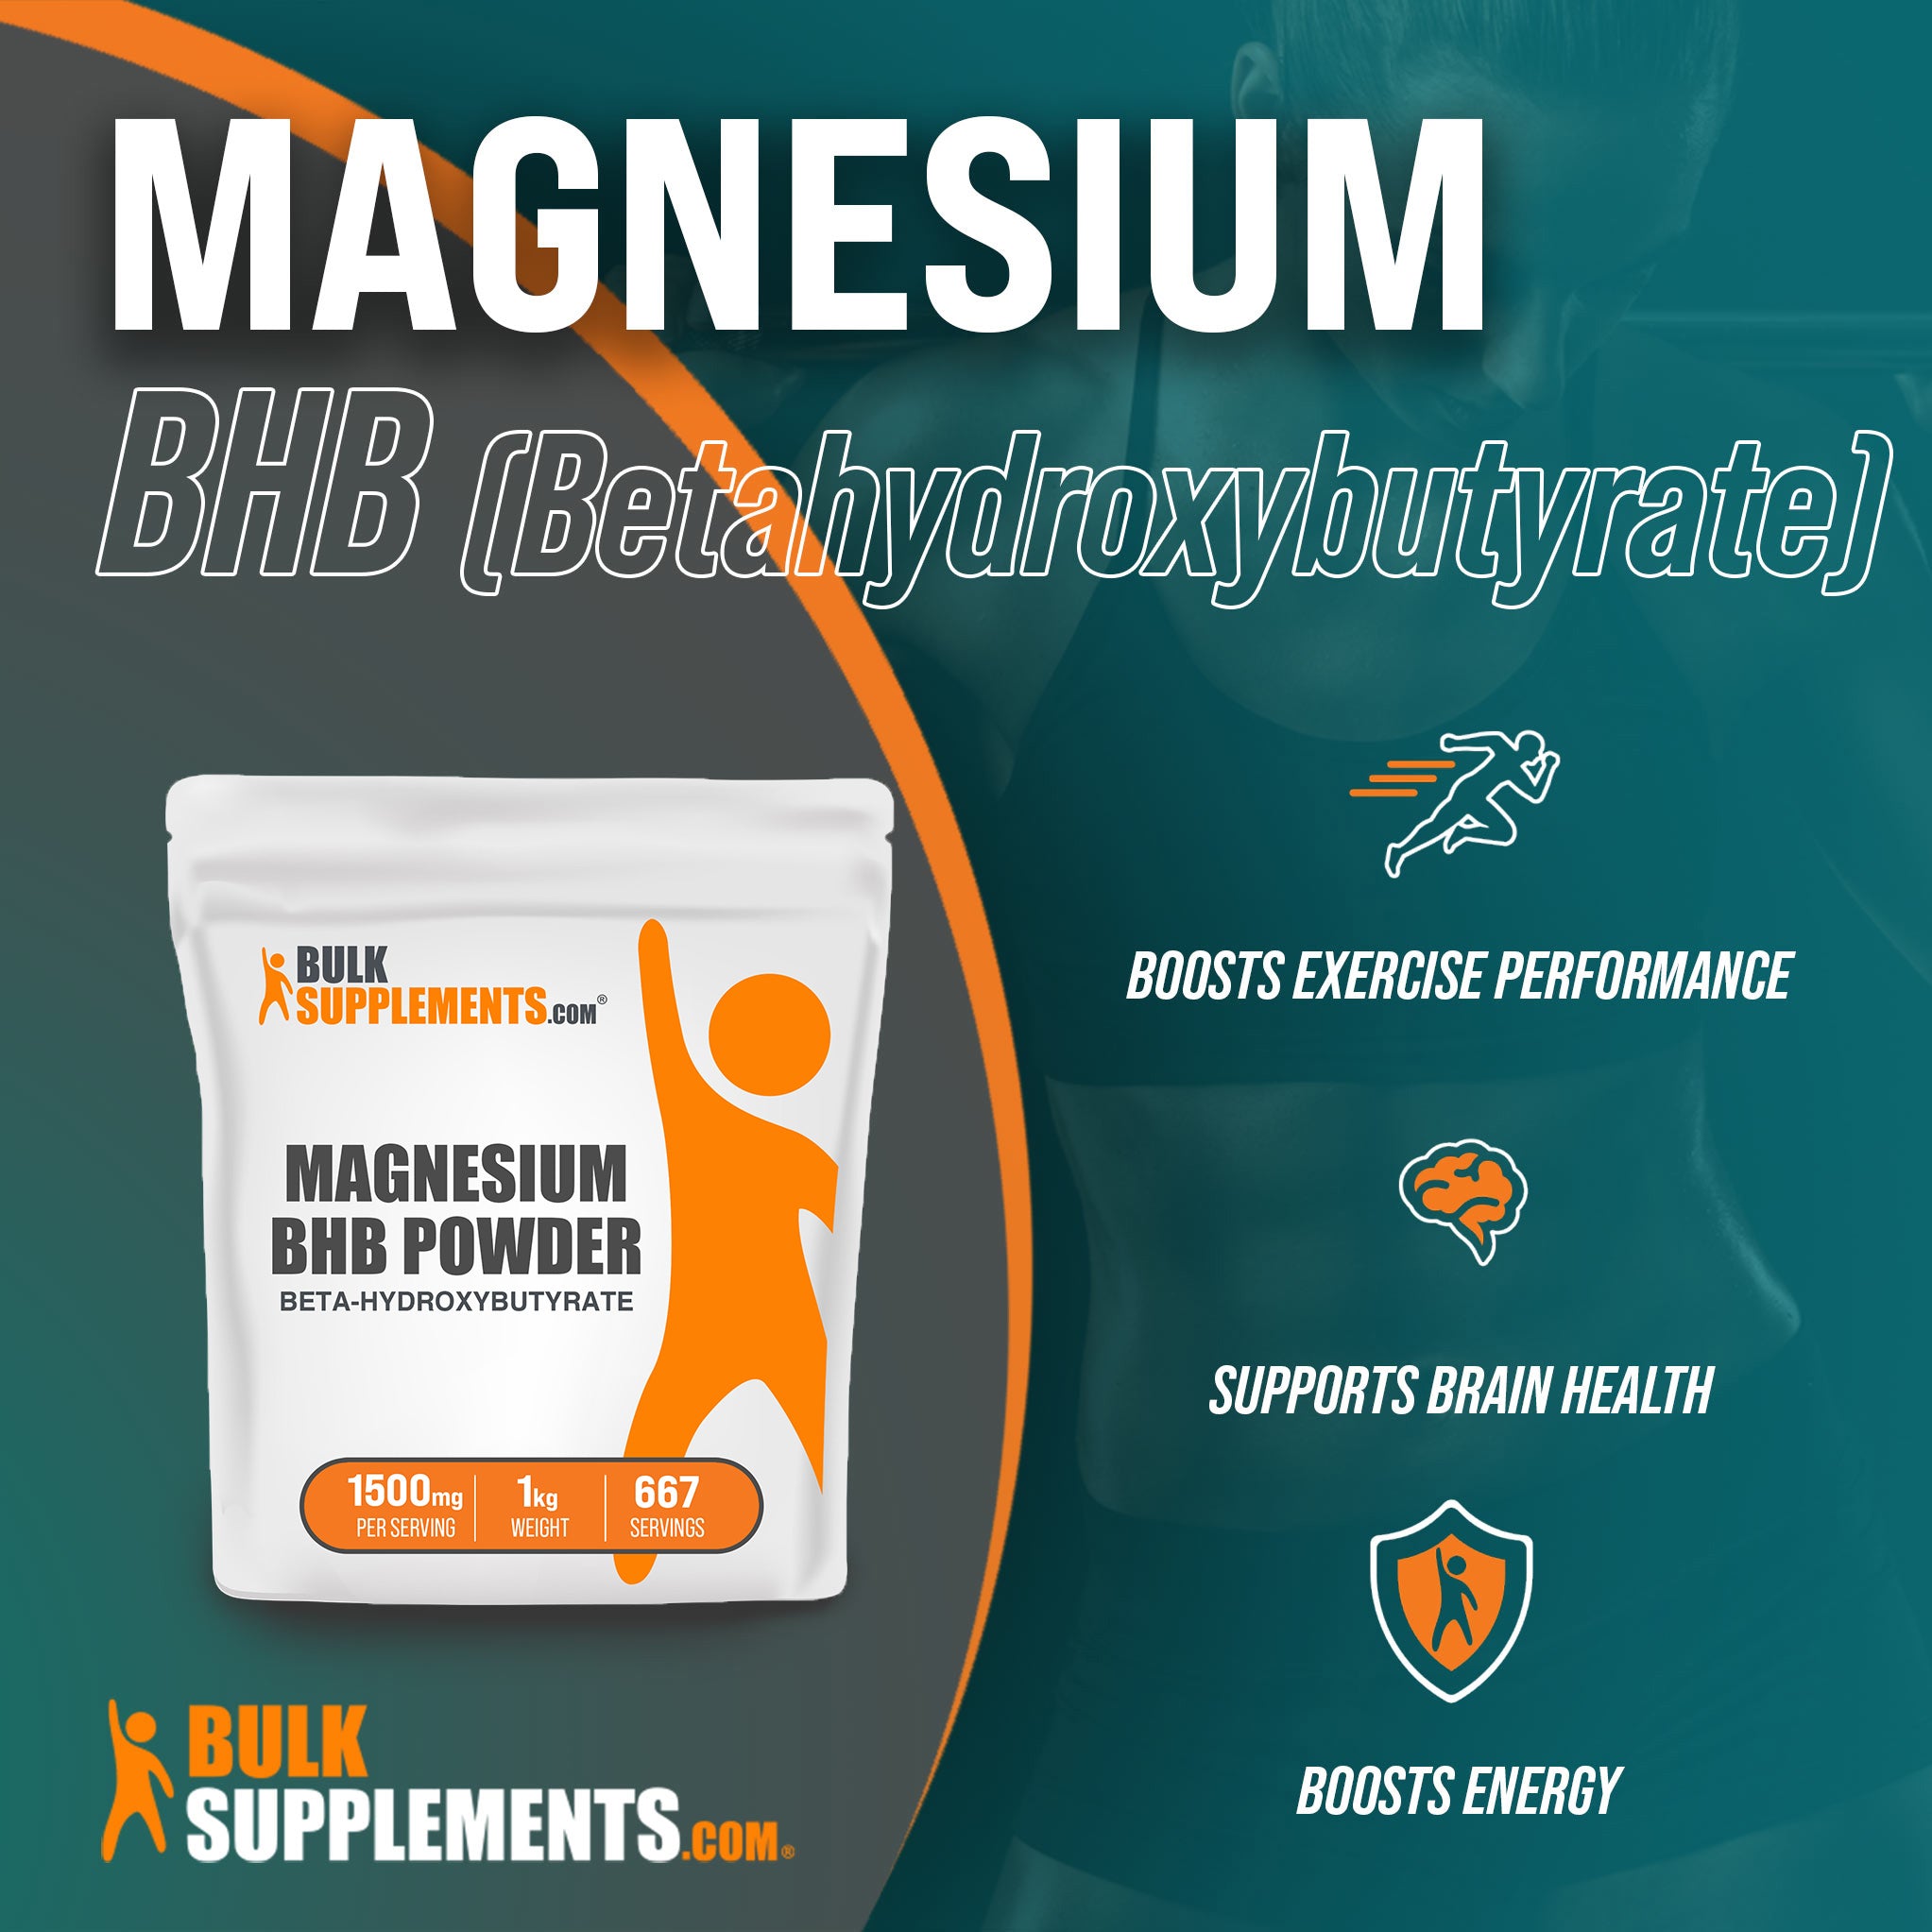 Benefits of Magnesium BHB (Beta-hydroxybutyrate); Boosts exercise performance, supports brain health, boosts energy